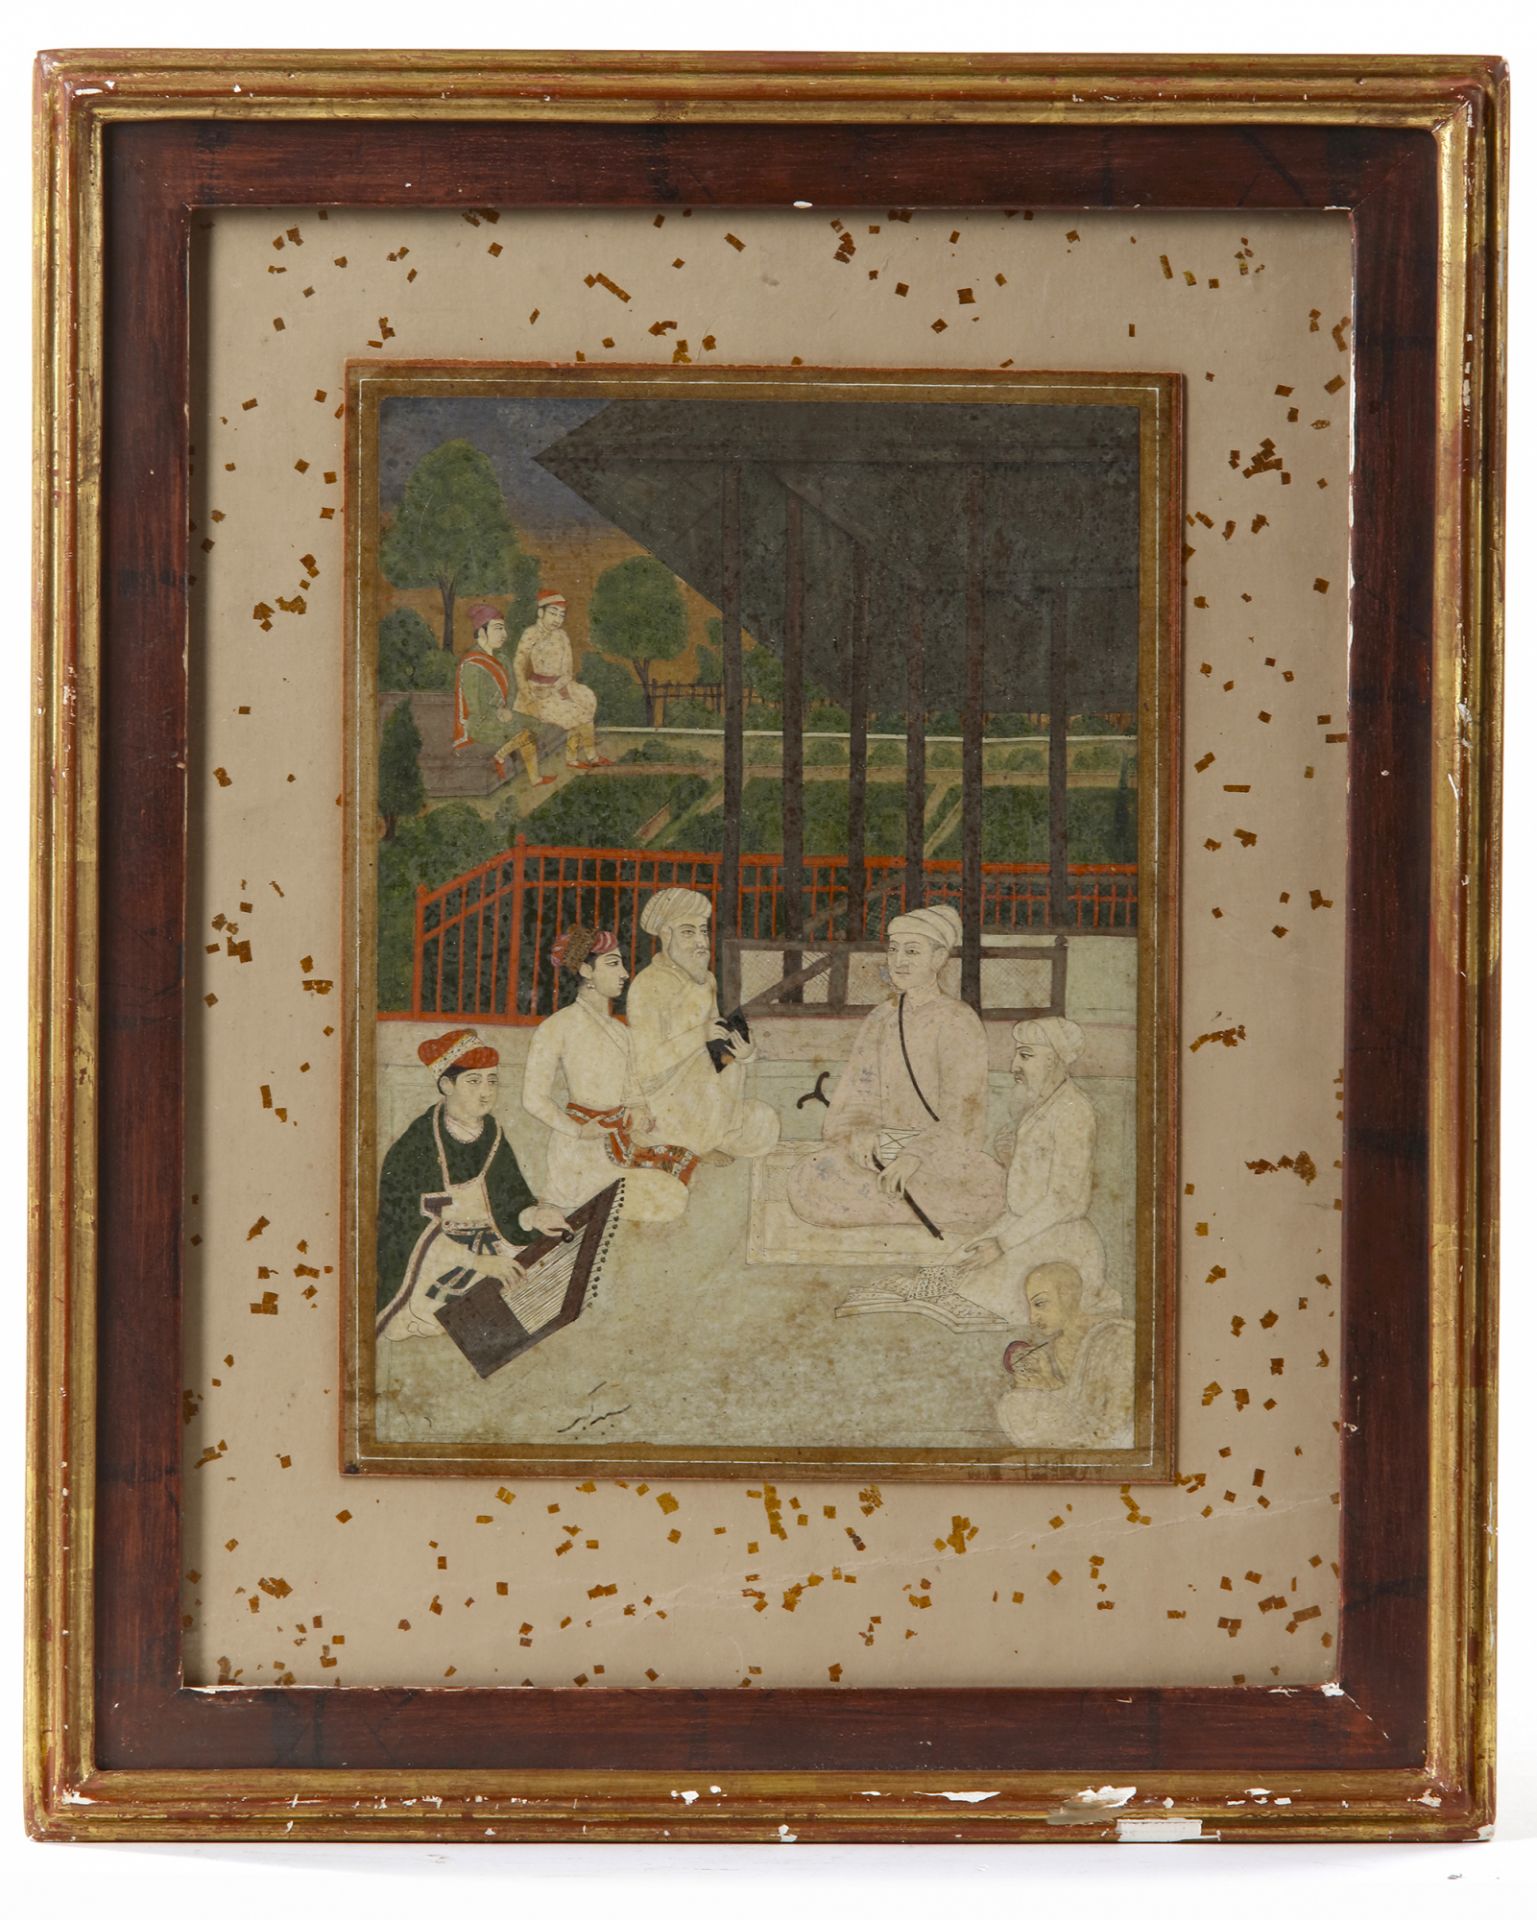 A PORTRAIT OF YOUNG PRINCE SEATED WITH ATTENDANTS, INDIA, MUGHAL, LATE 17TH CENTURY - Bild 2 aus 2